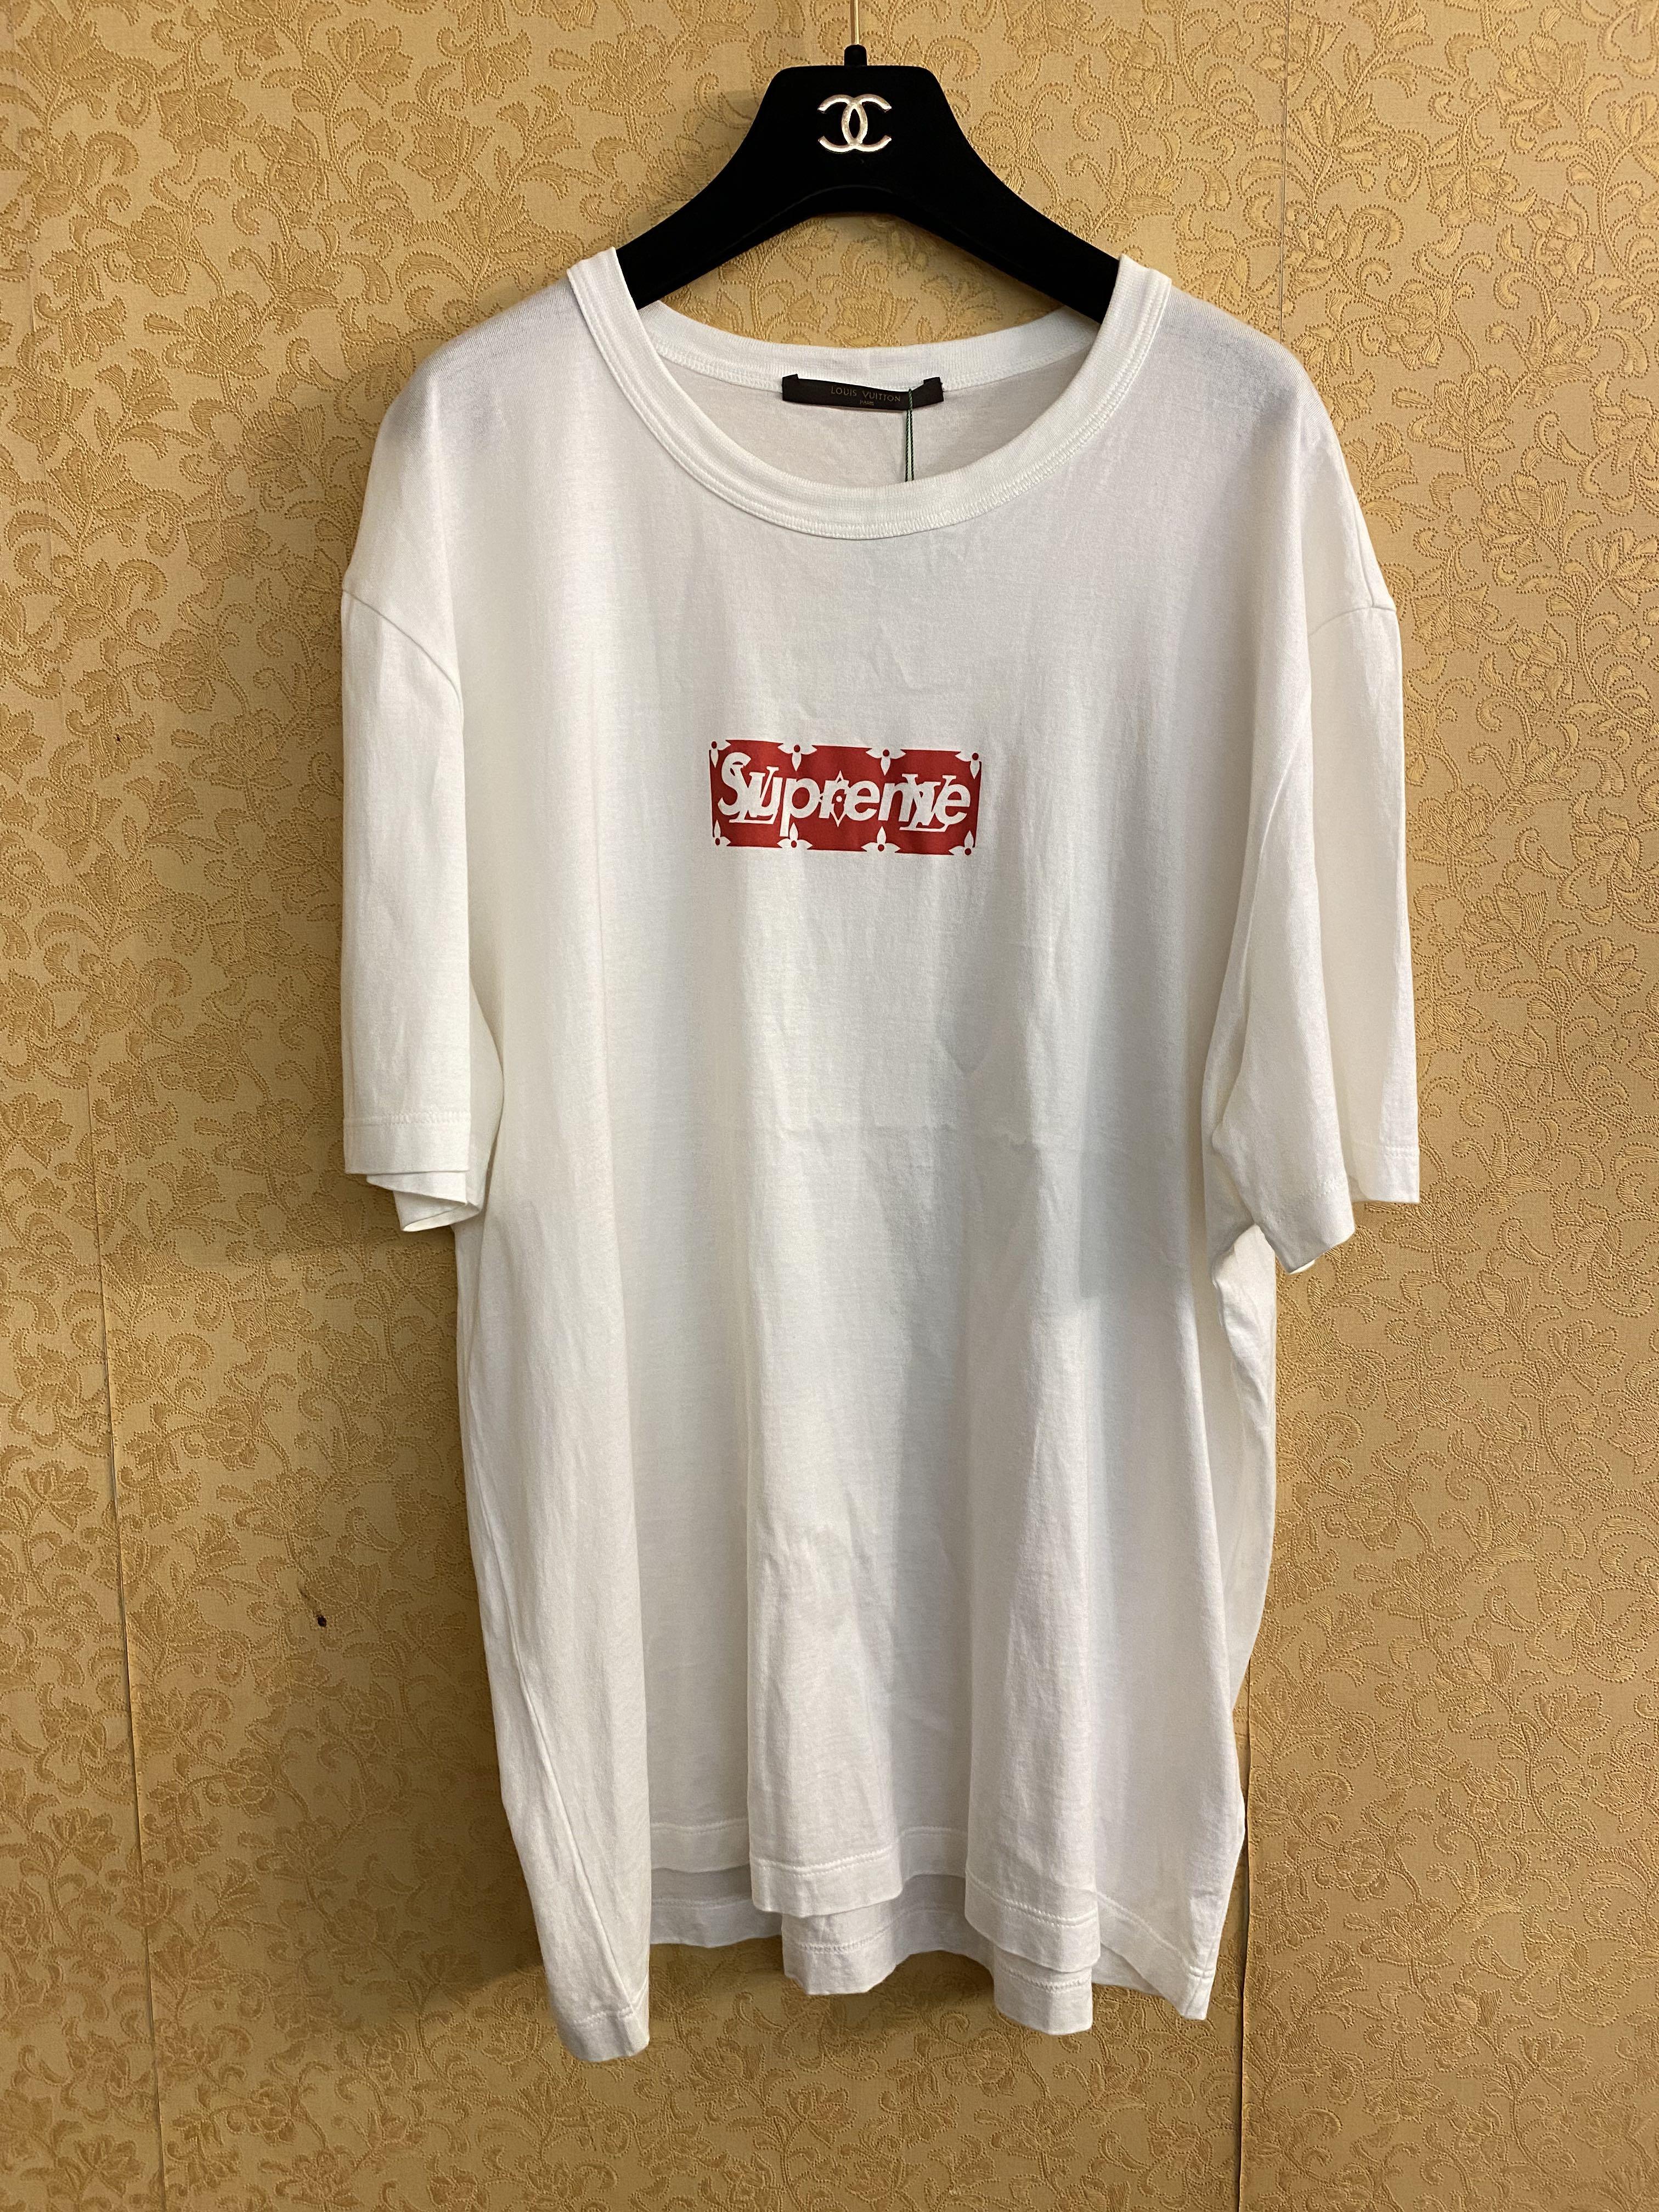 The T-SHIRT LOUIS VUITTON X SUPREME white Game on his account Instagram